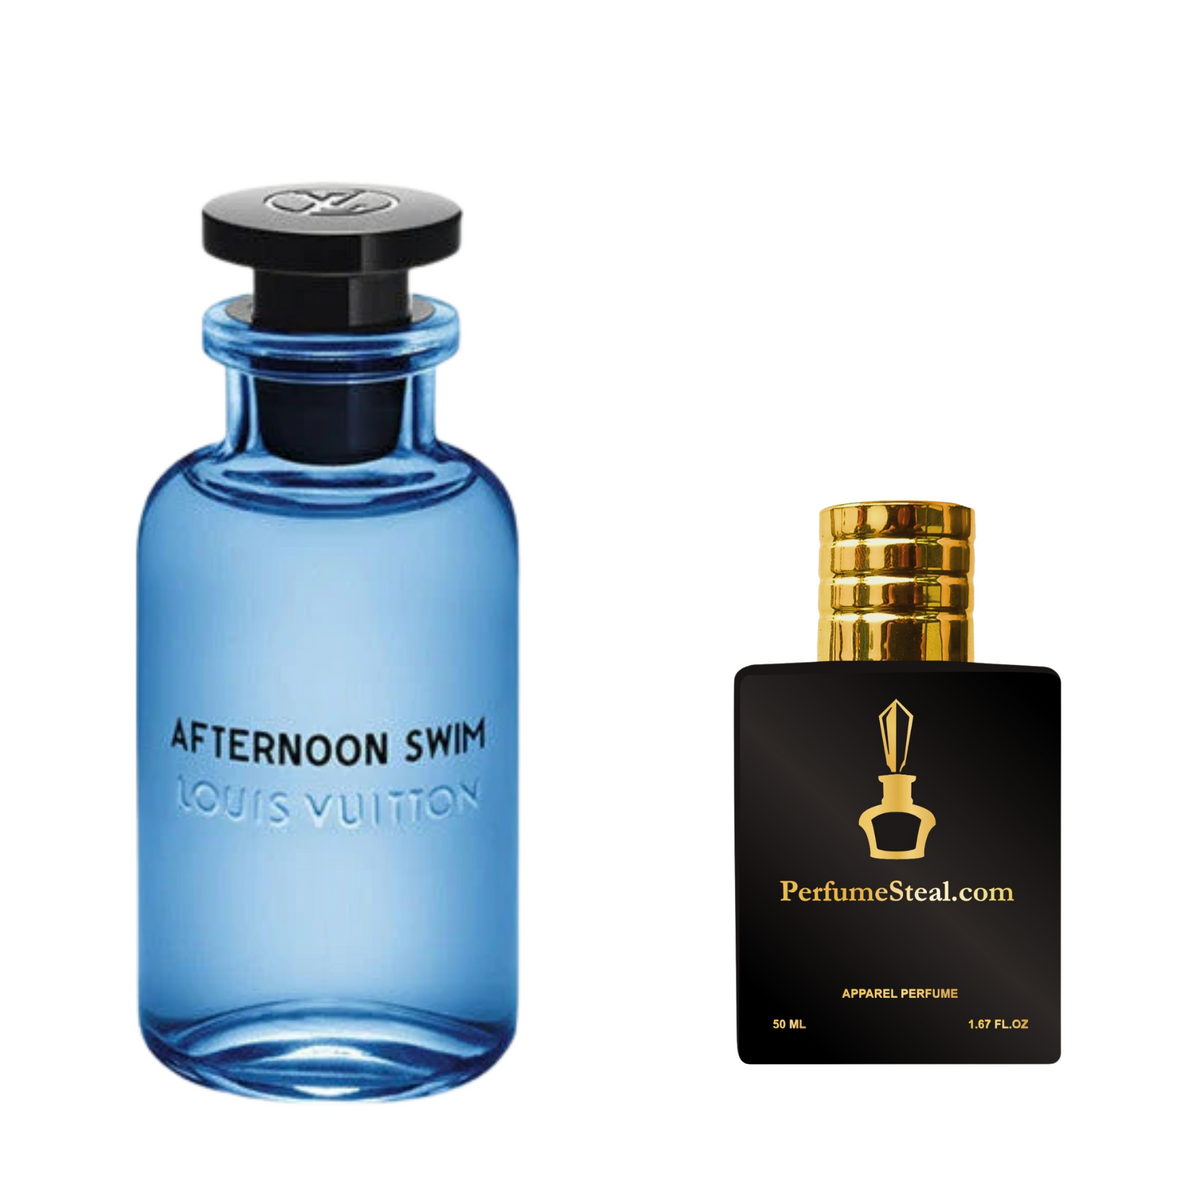 Afternoon Swim by Louis Vuitton type Perfume –